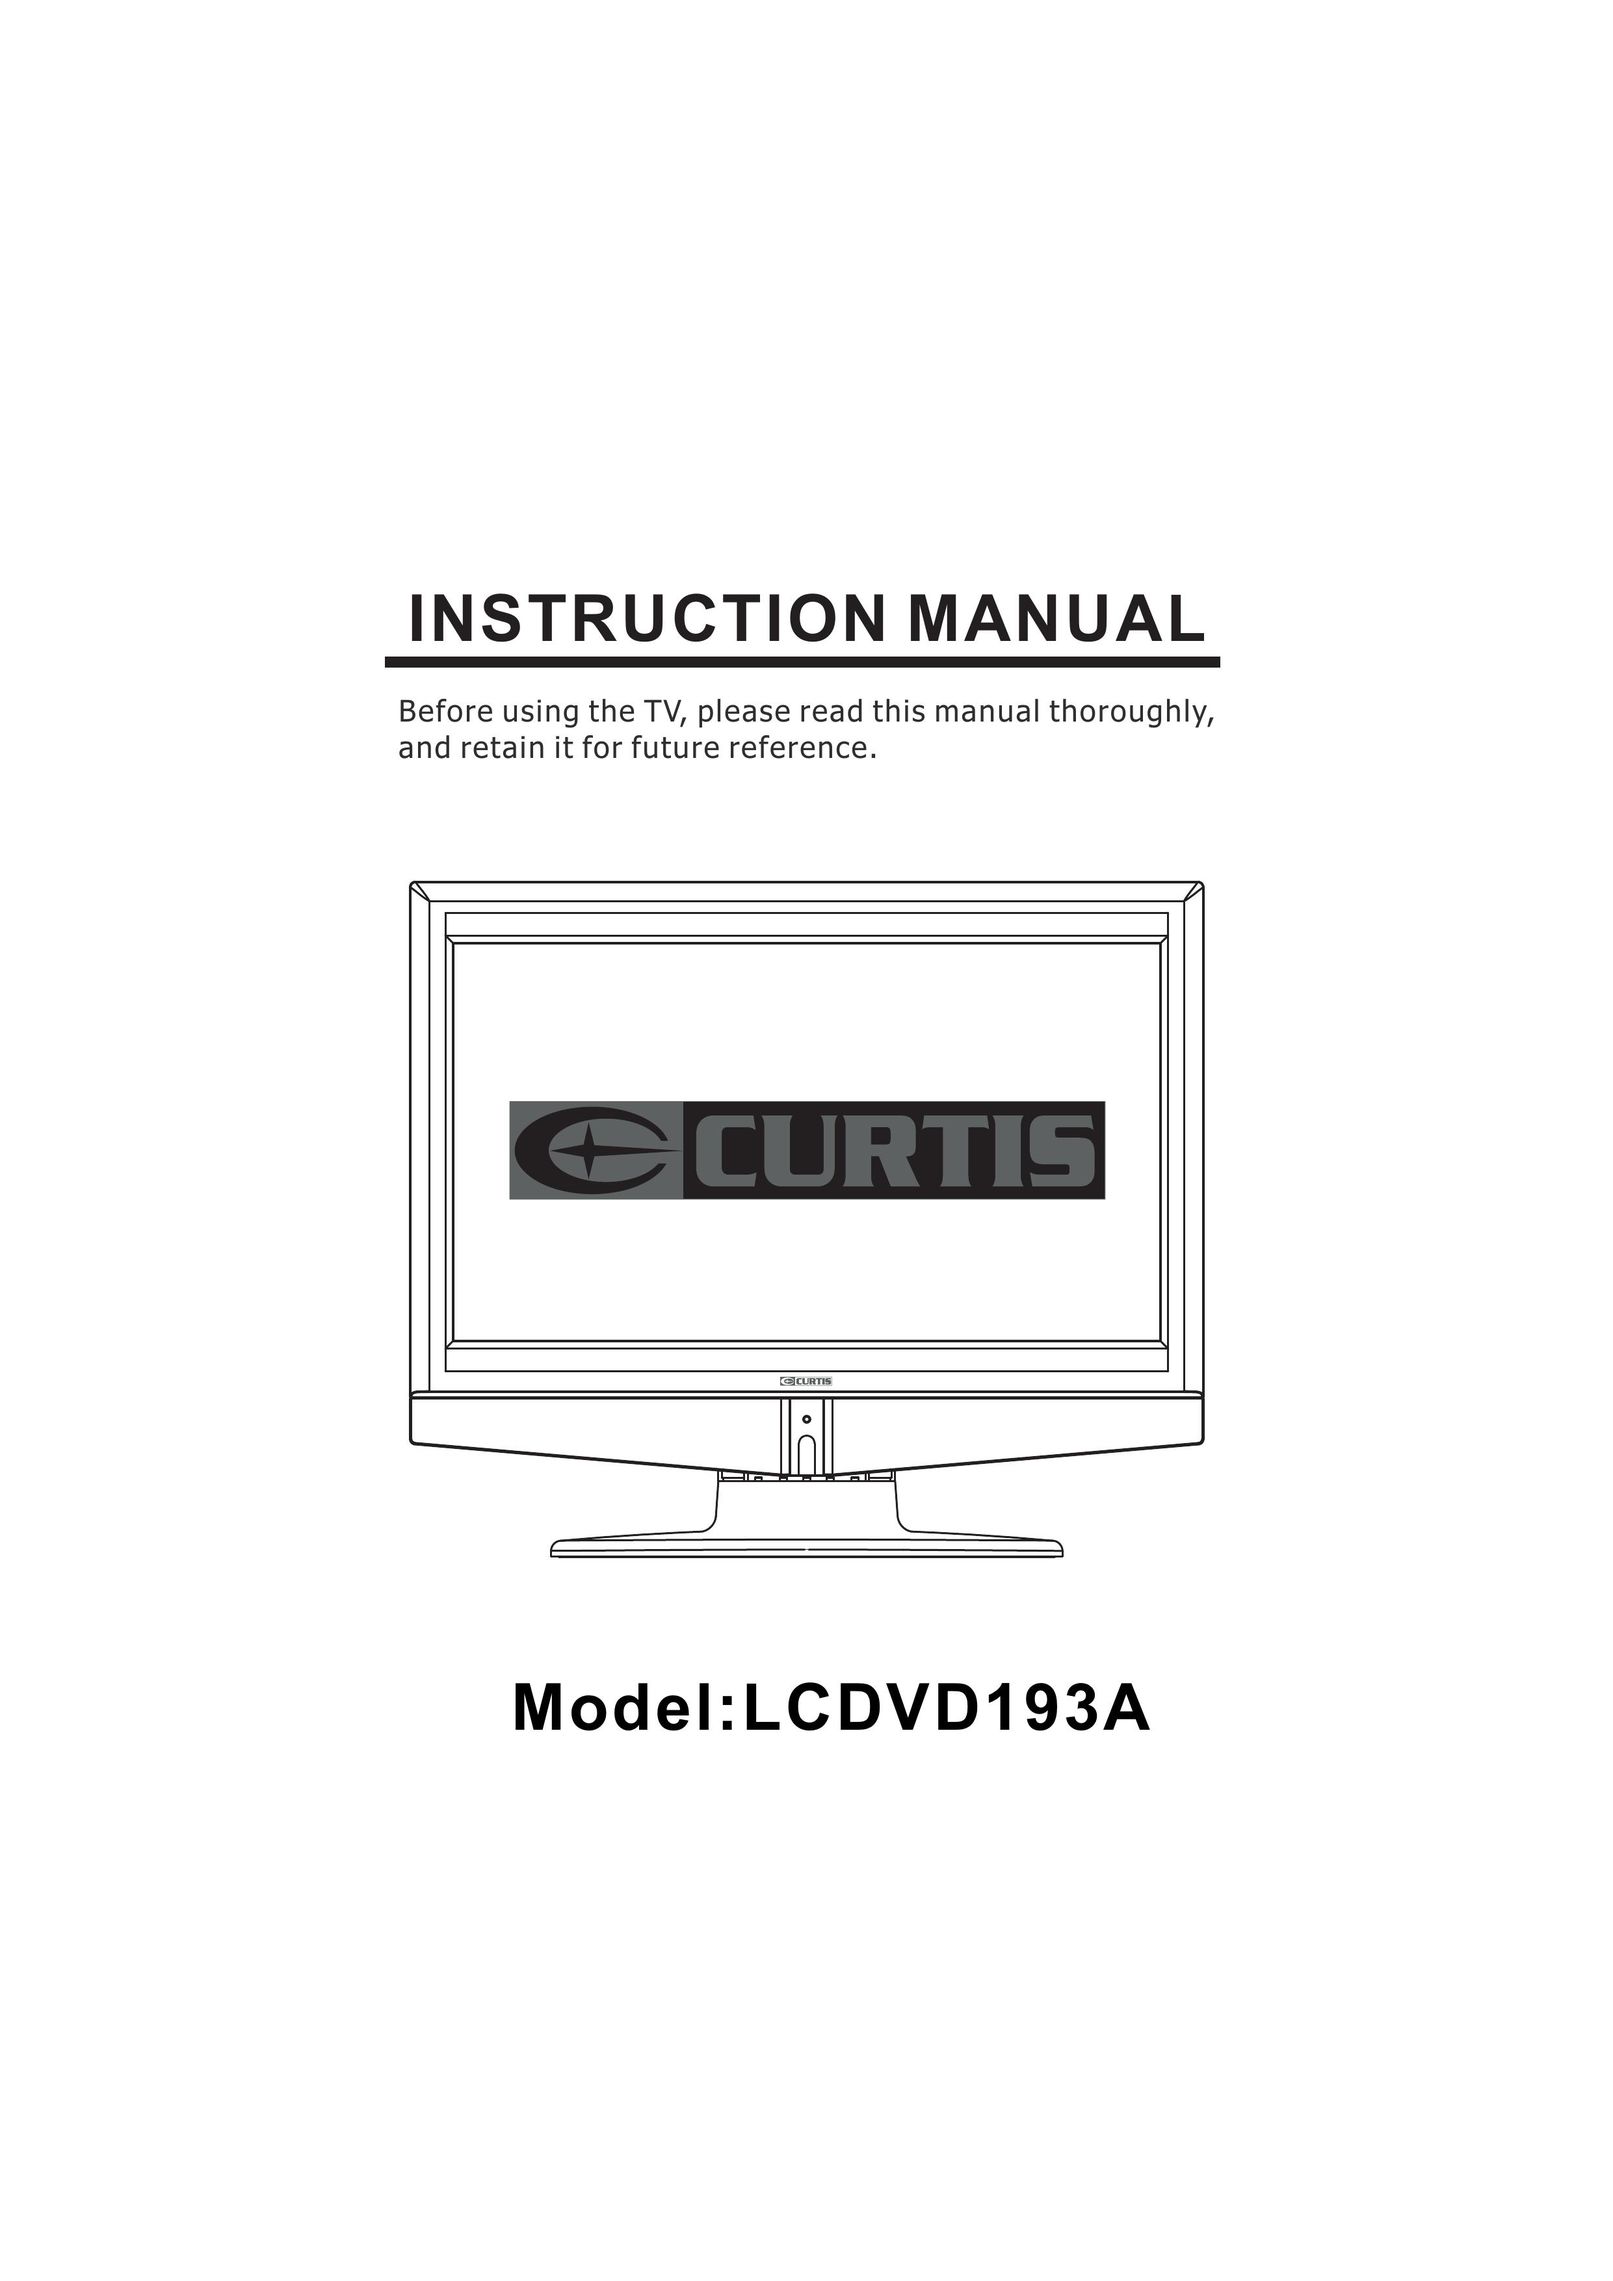 Curtis LCDVD193A Flat Panel Television User Manual